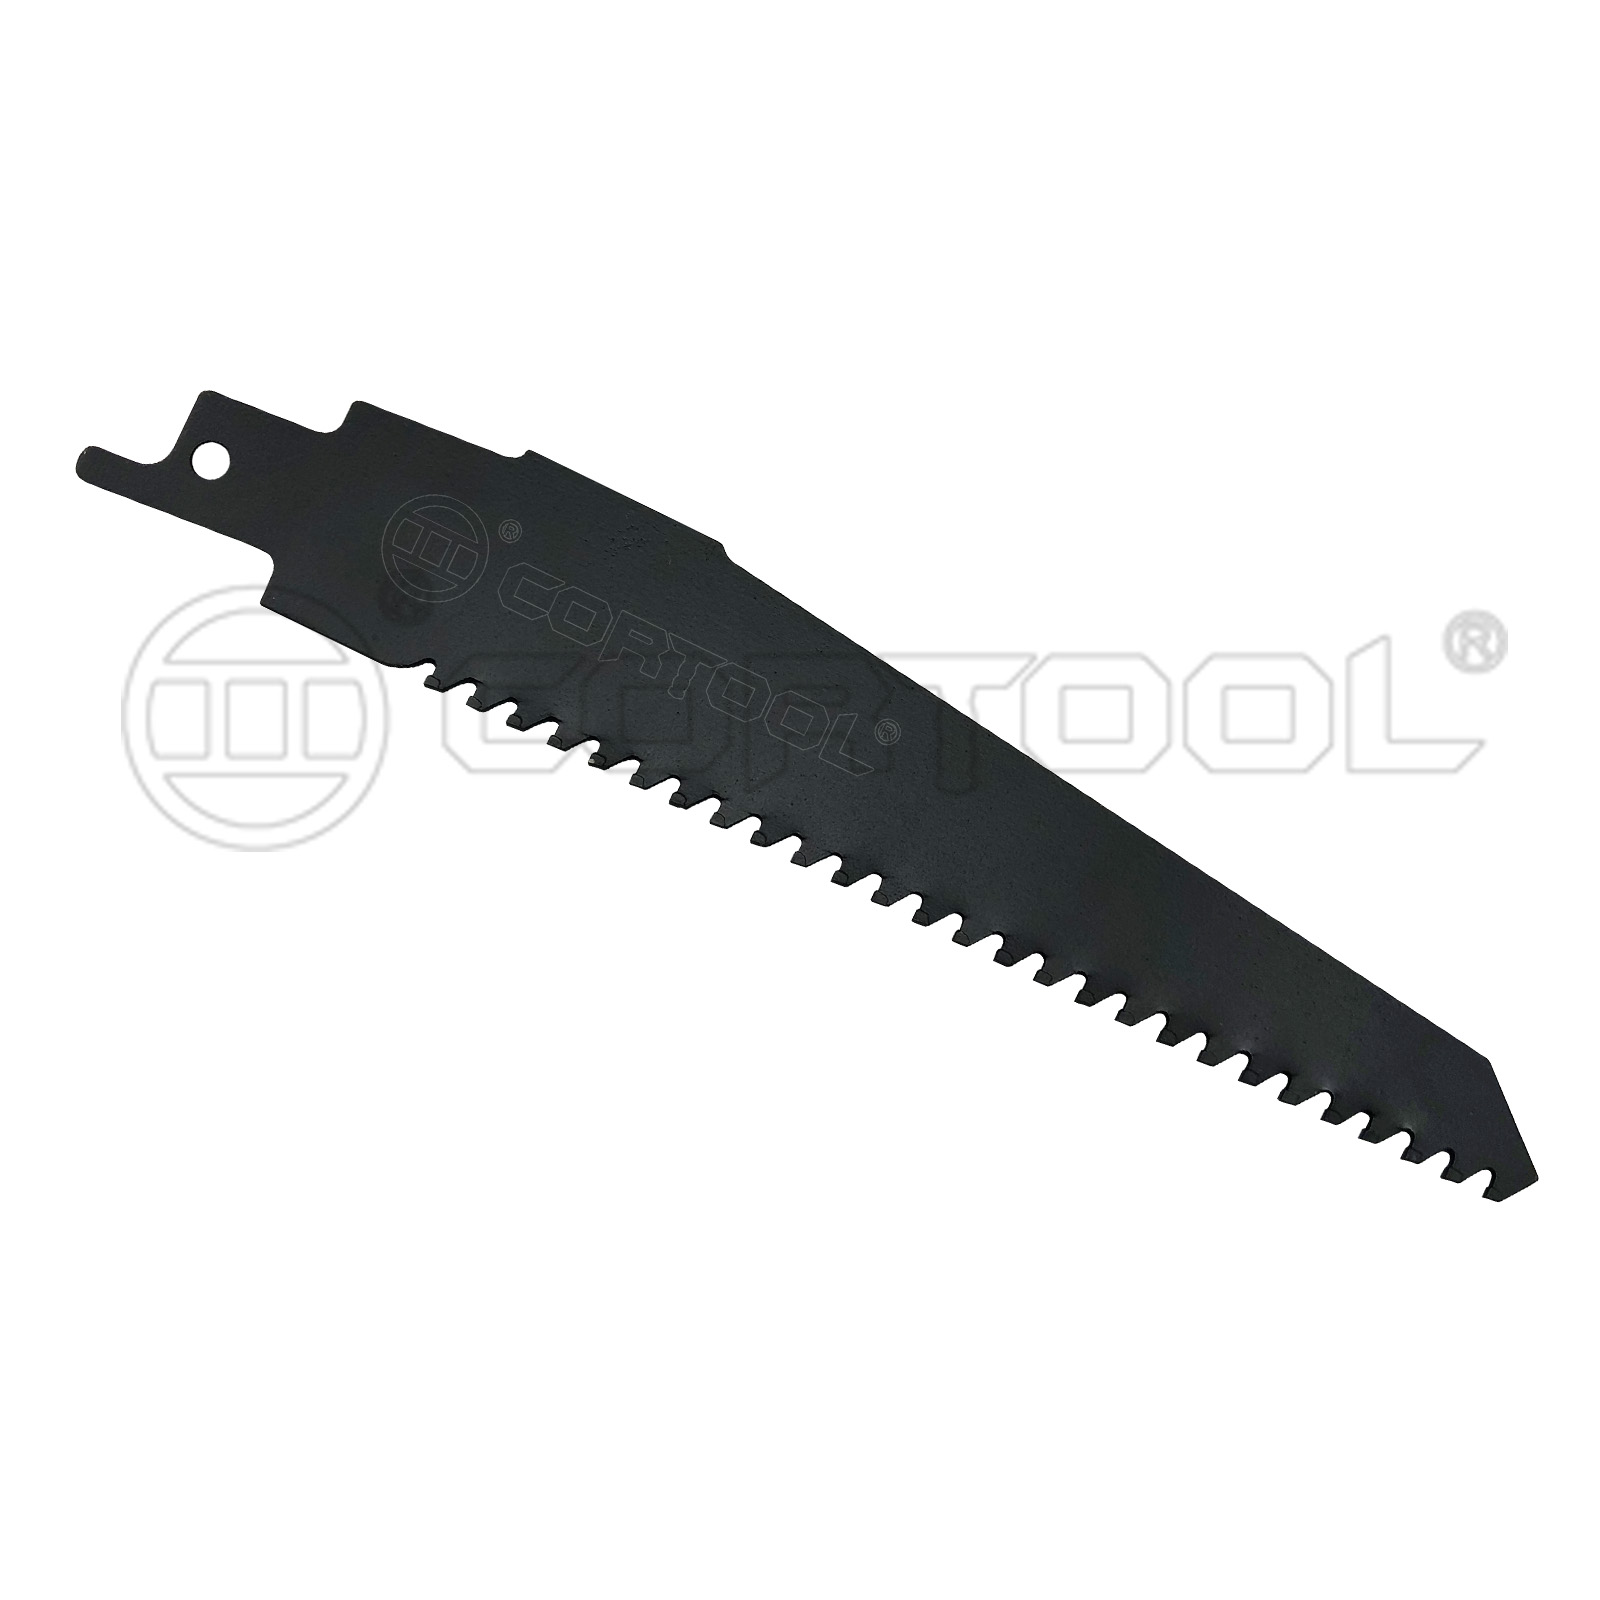 Reciprocating saw blade with carbide teeth